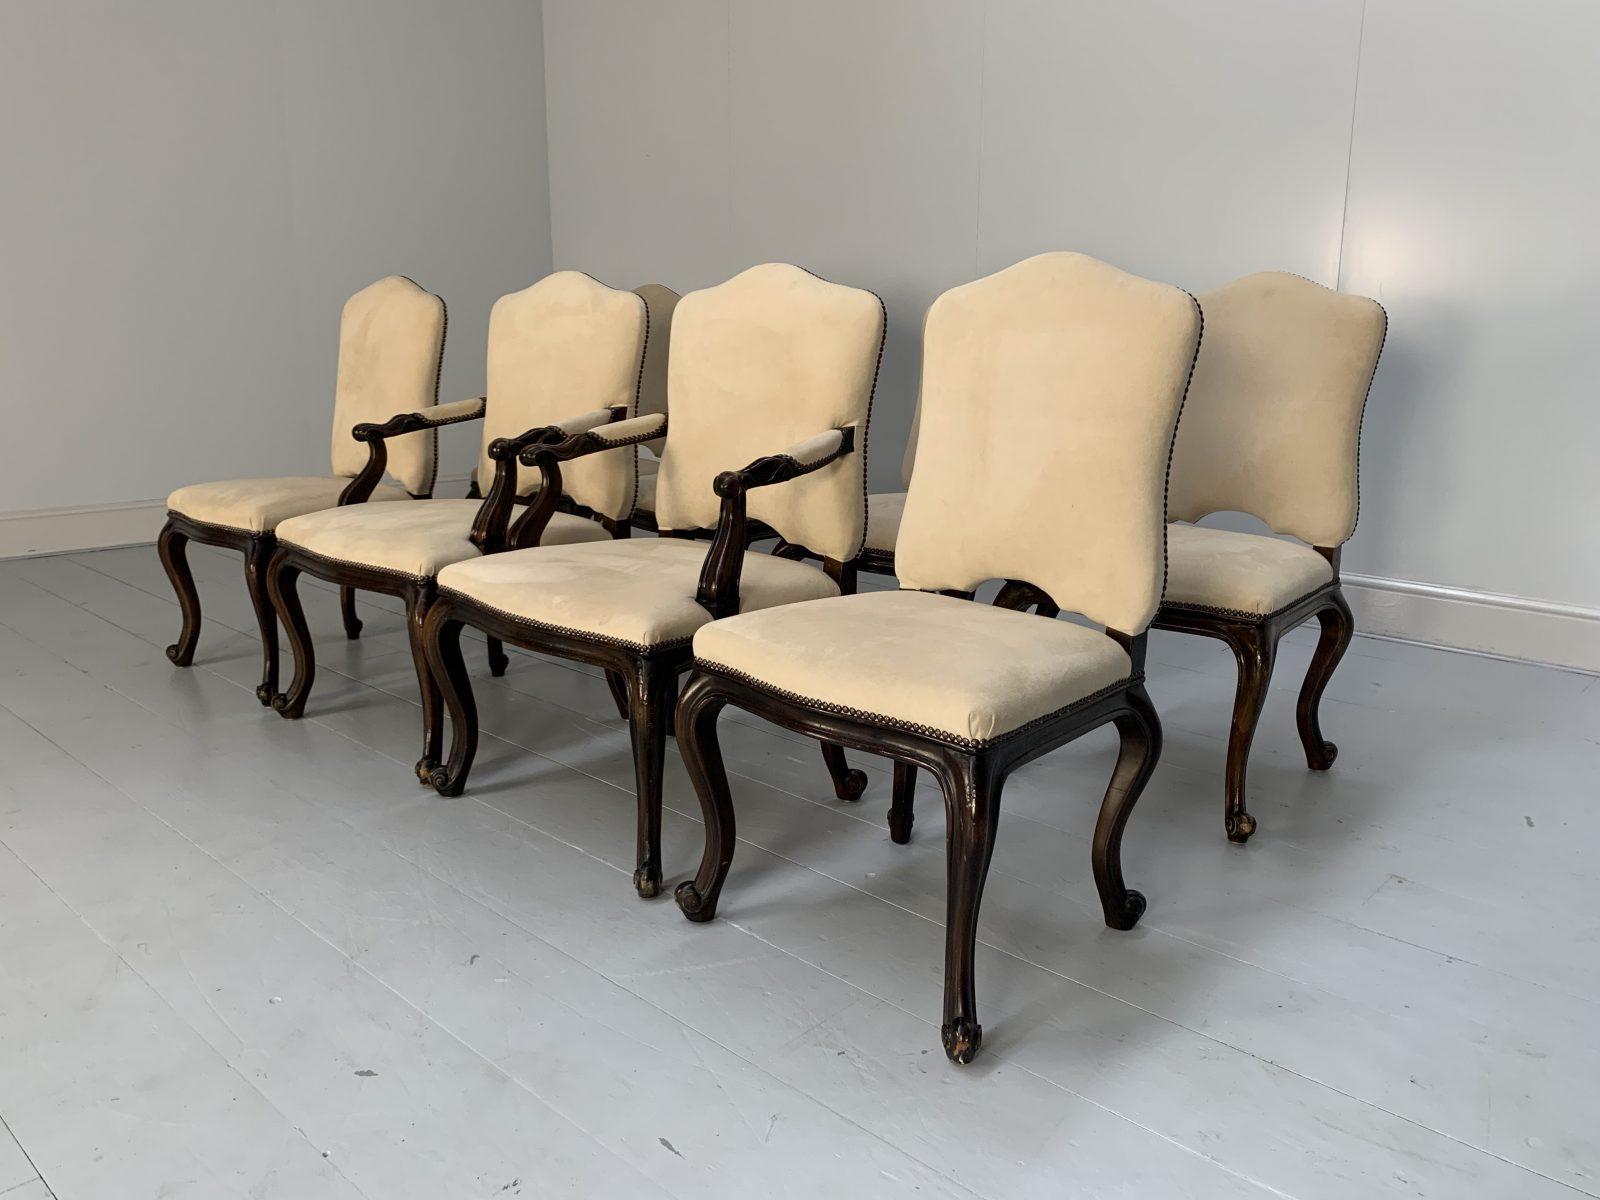 This is one of the most handsome, refined suites of dining chairs you could hope to find.

This is an ultra-rare opportunity to acquire what is, unequivocally, the best of the best, it being a most spectacular, immaculate, beautifully-presented